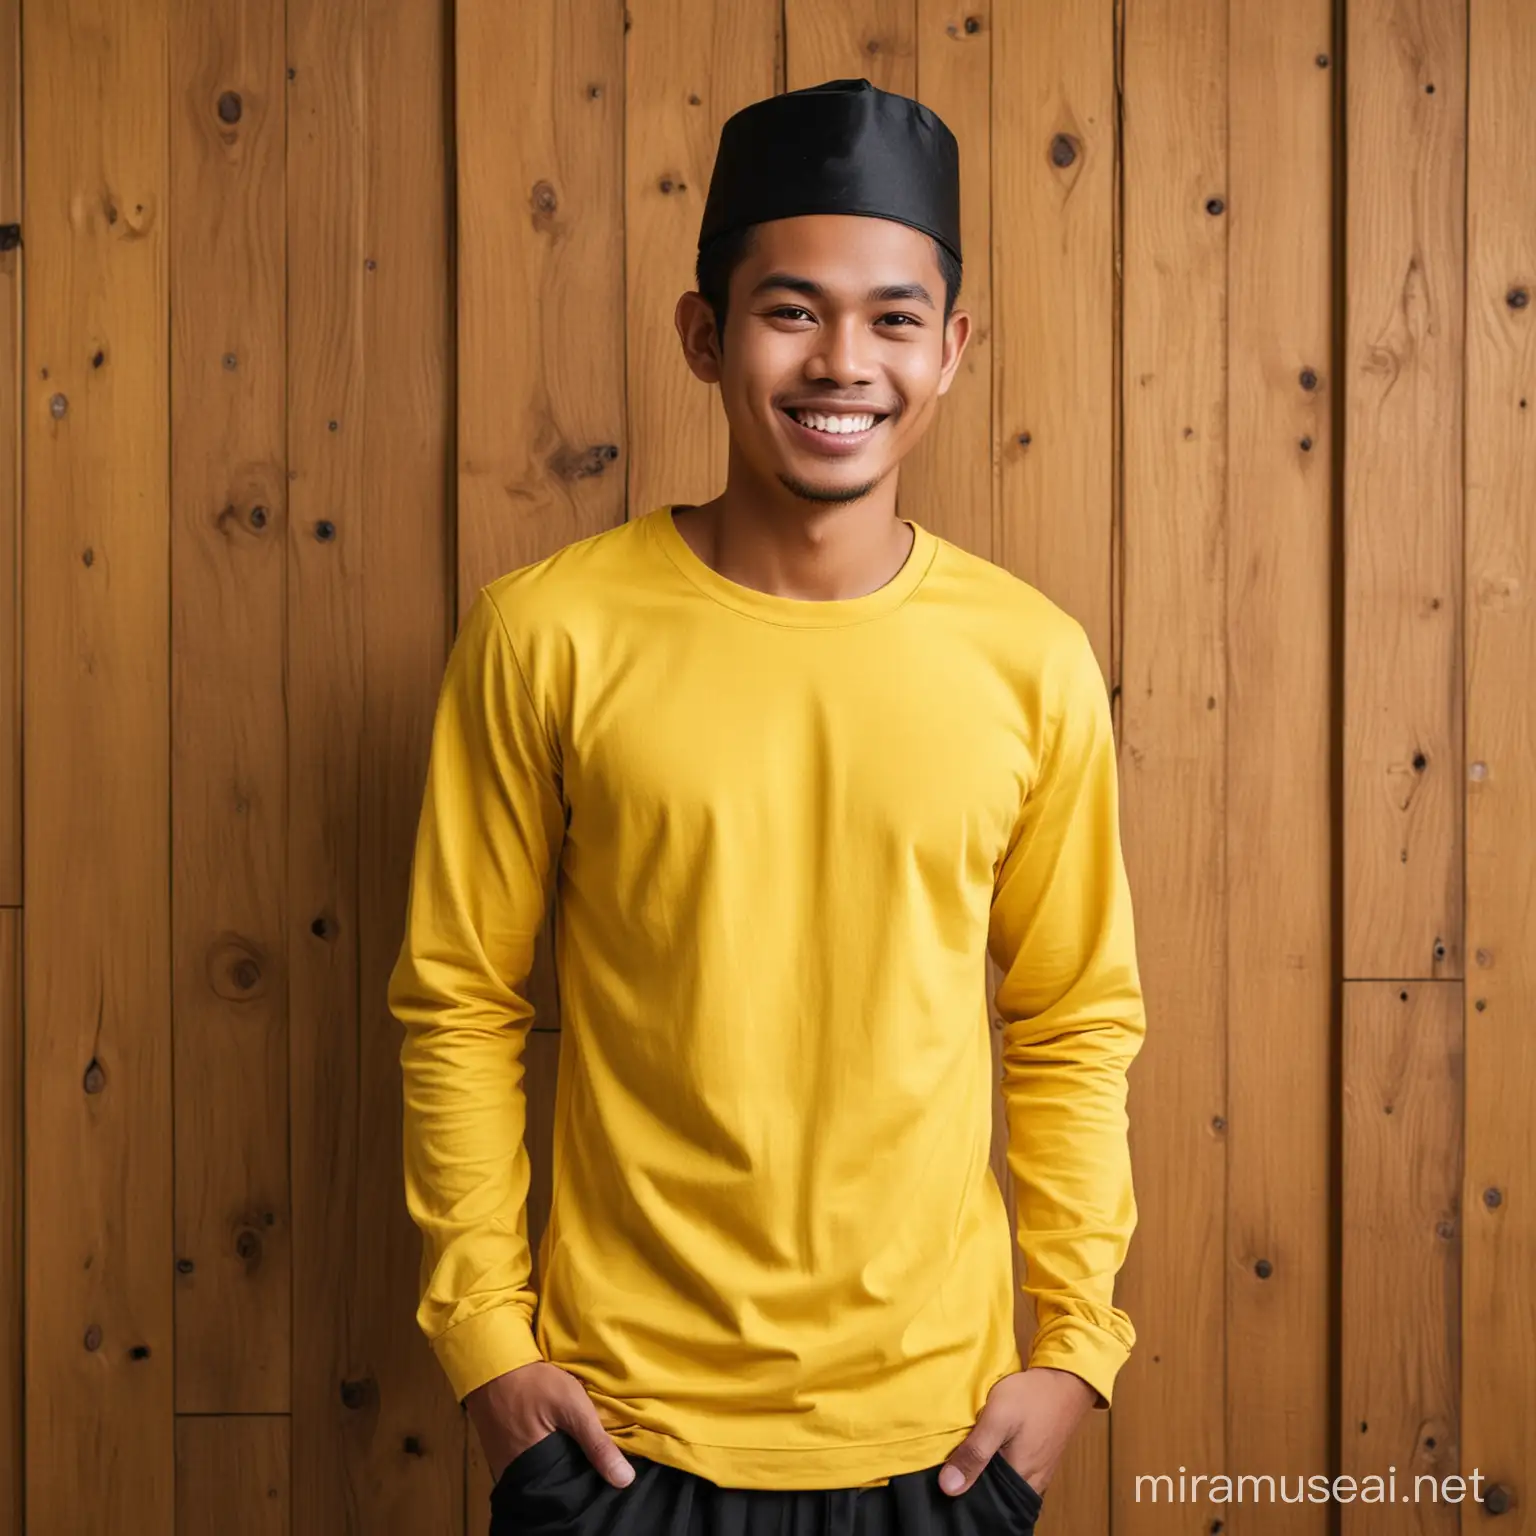 Proud Indonesian Man in Traditional Attire Smiling Against Wooden Wall